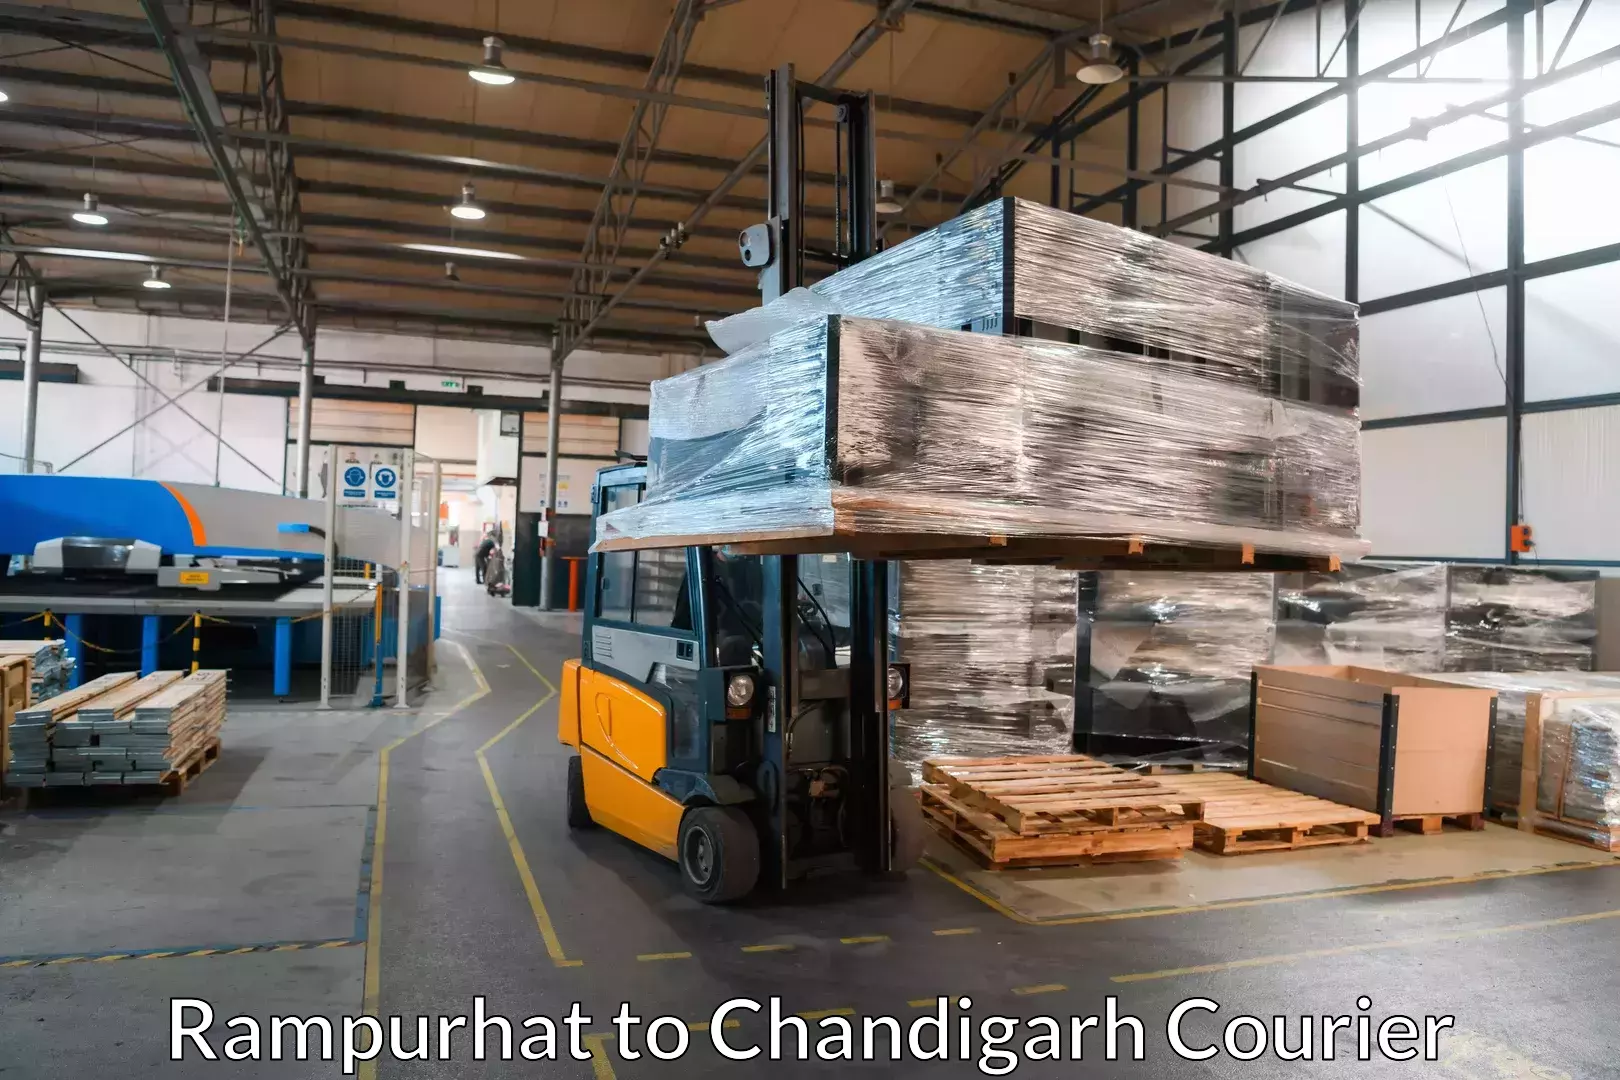 Furniture moving specialists Rampurhat to Chandigarh